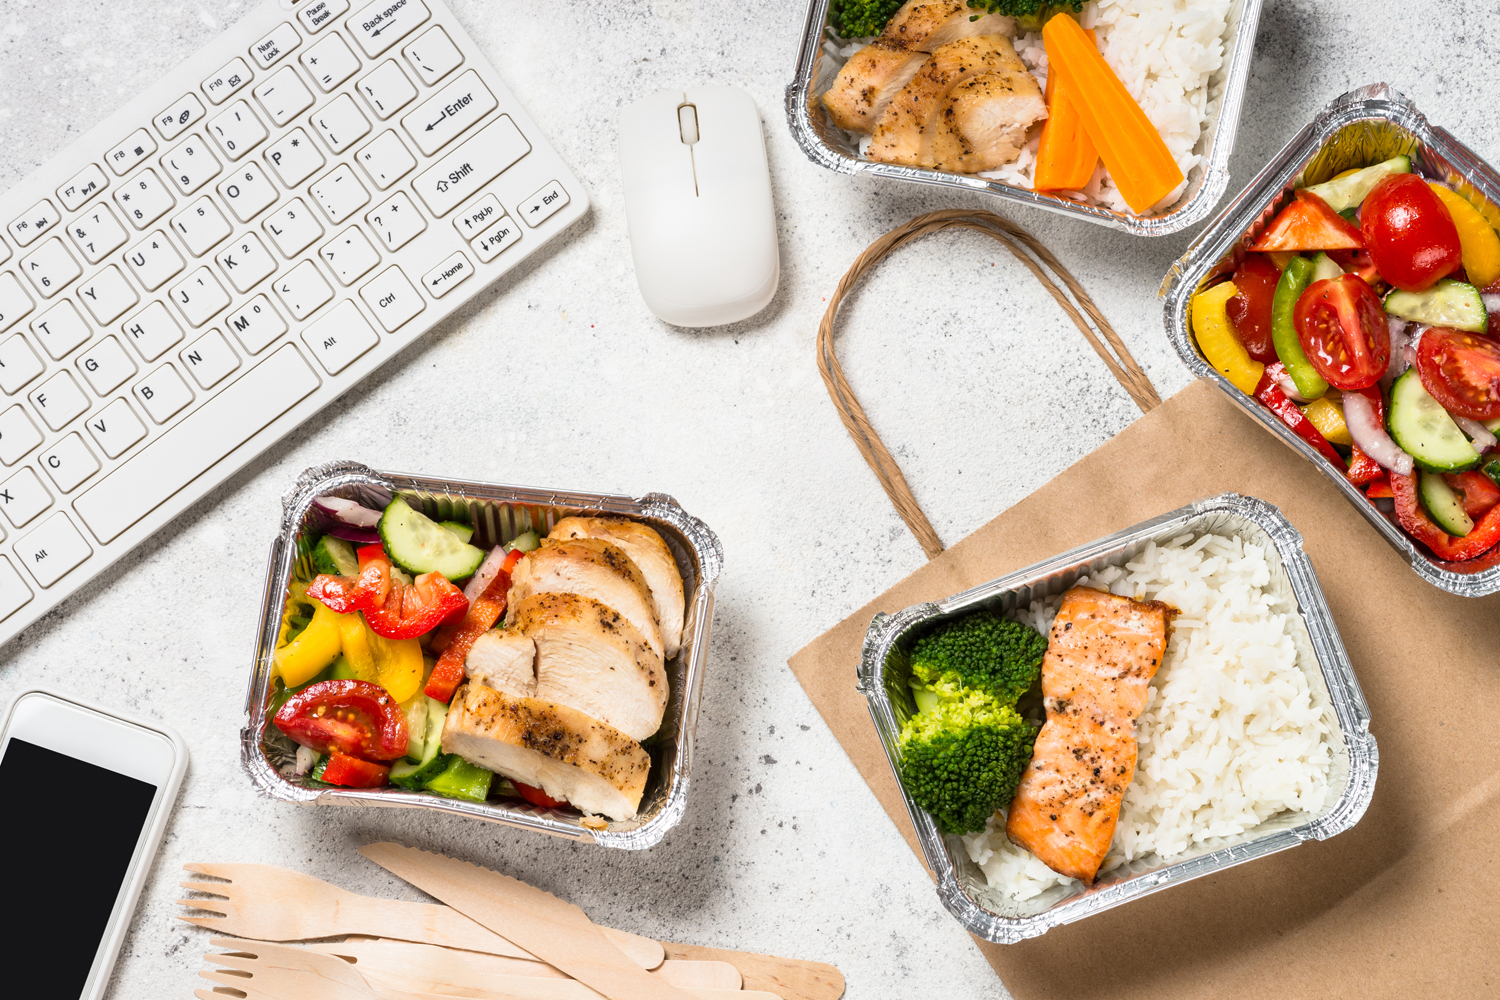 New healthy meal subscription plan ‘Meals on Me' launching in Dubai ...